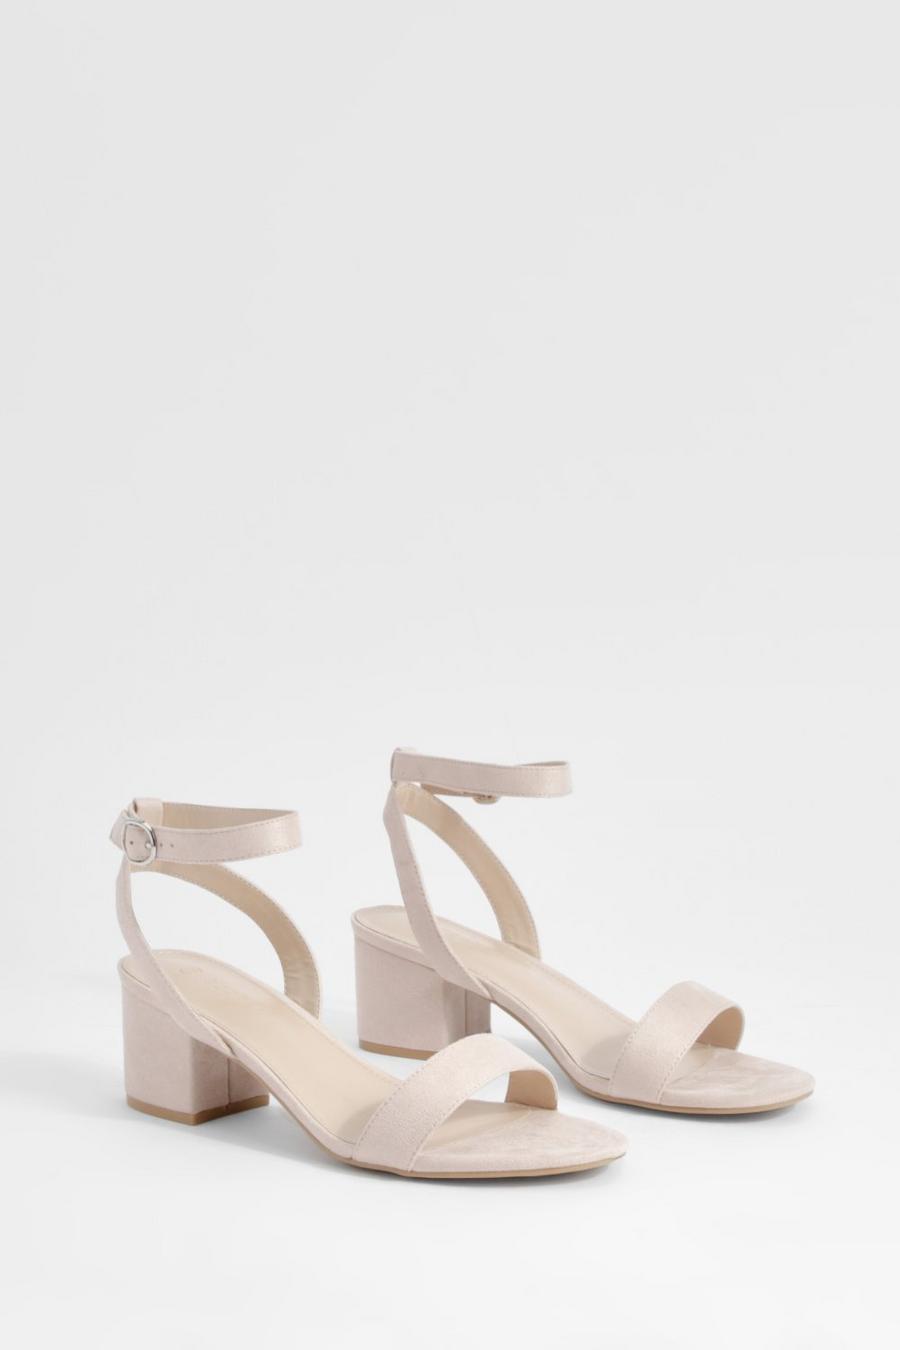 Blush Wide Fit Low Block Barely There Heels   